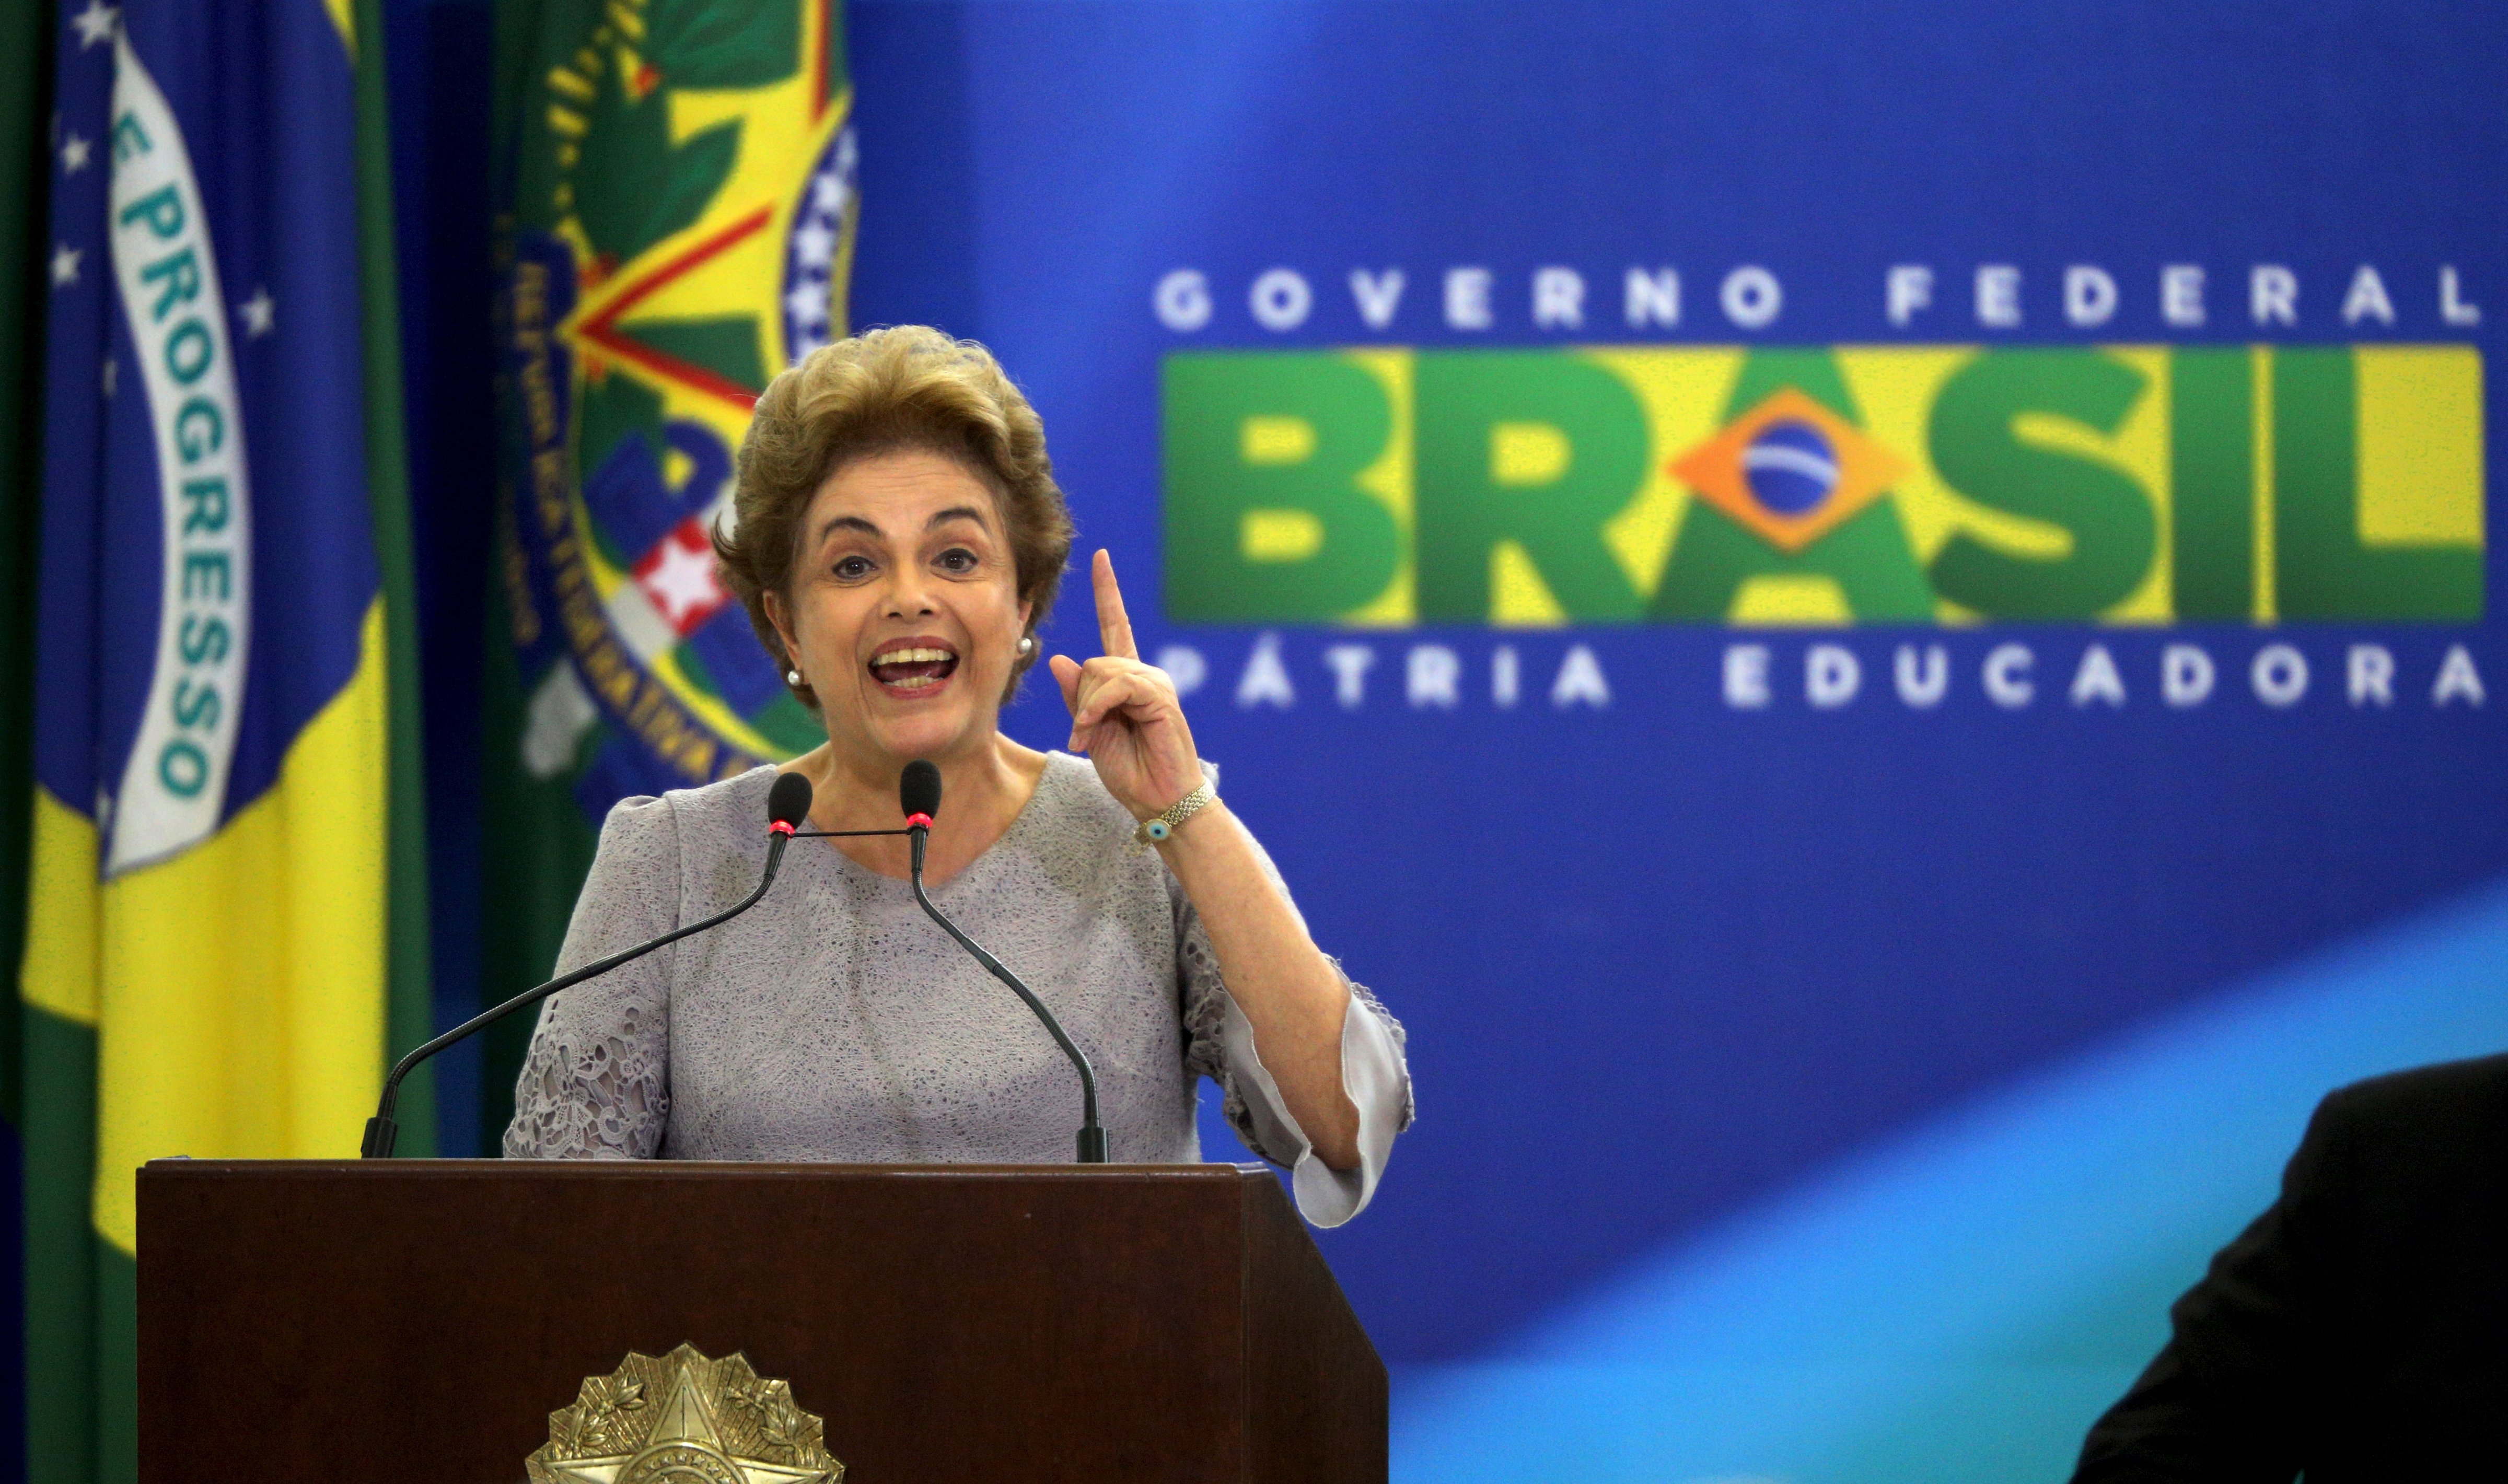 Brazil's President Rousseff speaks during a meeting with jurists at Planalto Palace in Brasilia